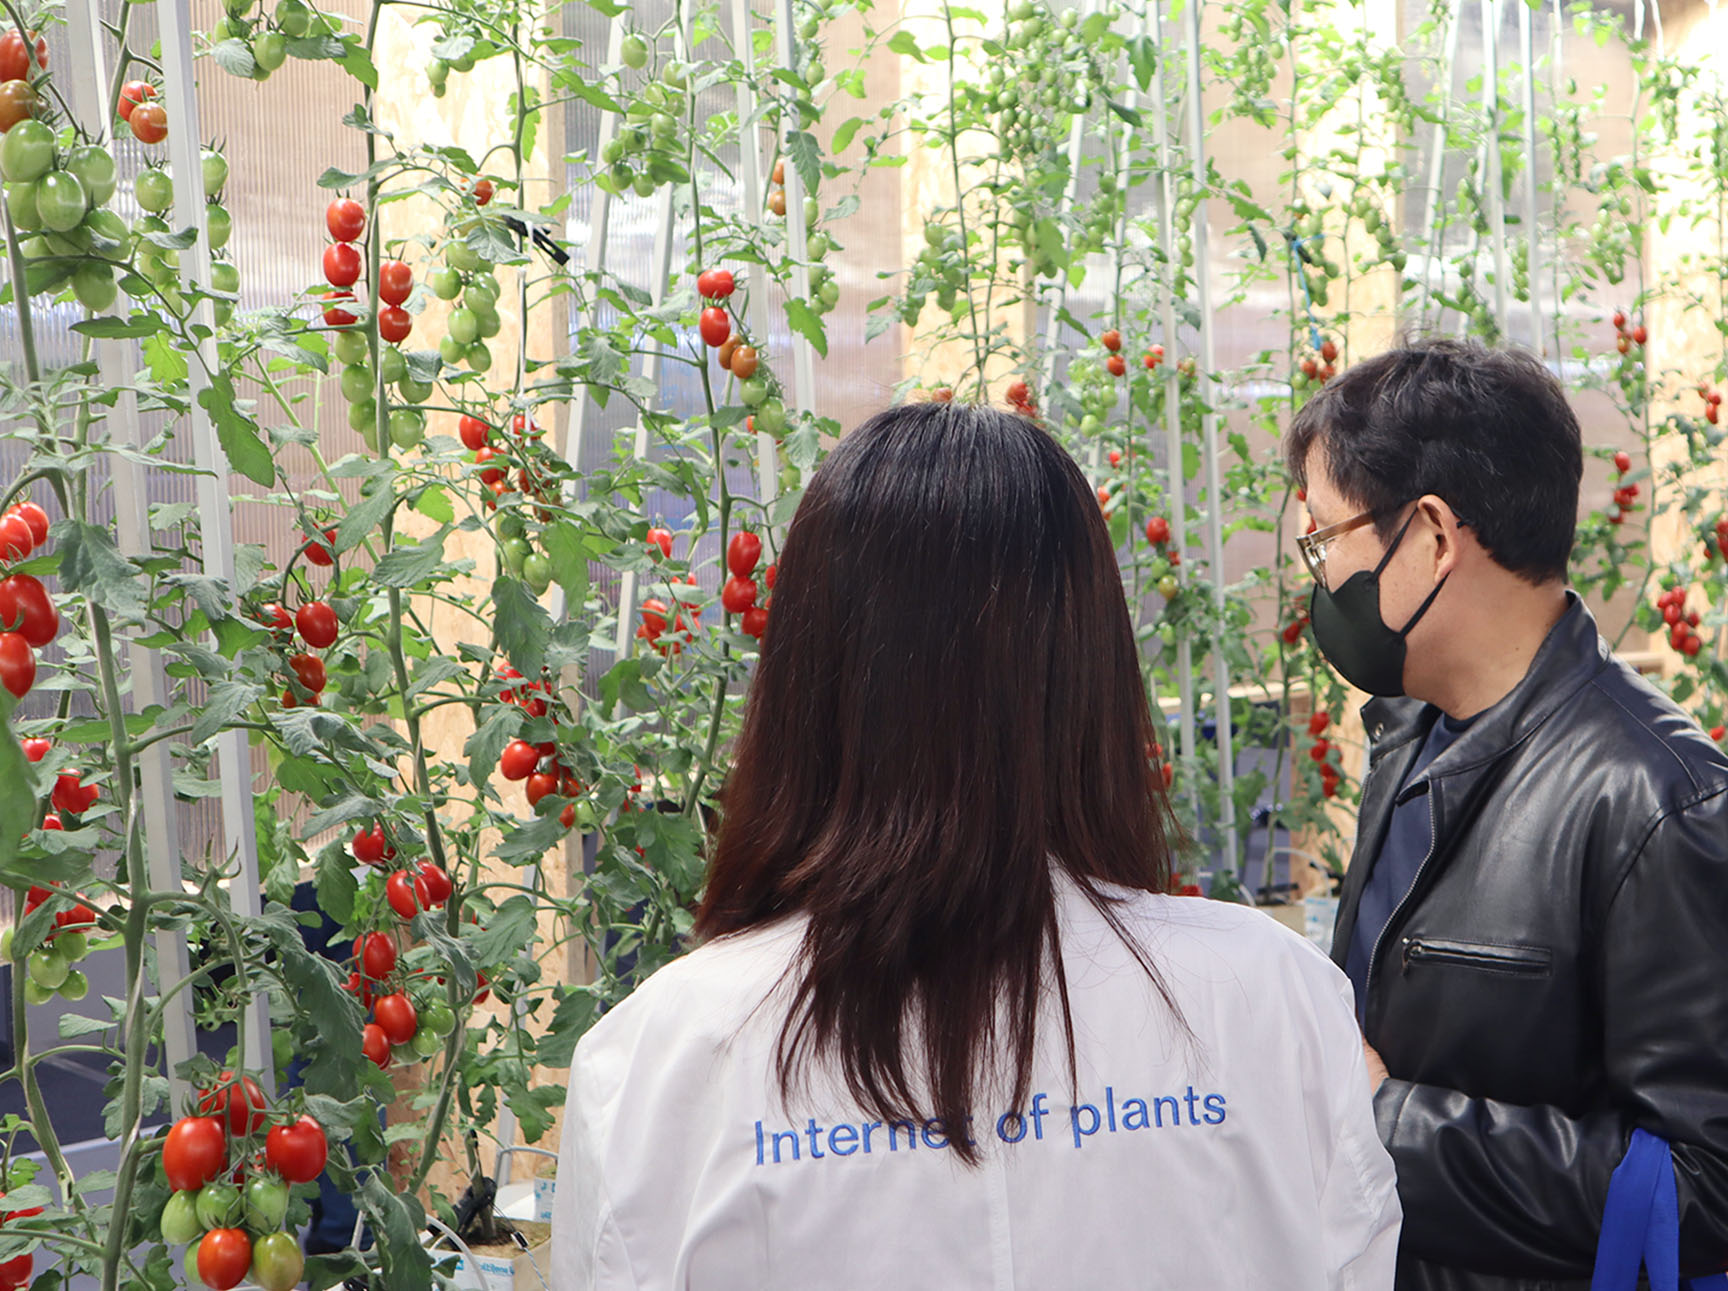 A Telofarm employee explains our smart farm system to a customer whilst surrounded by tomato plants